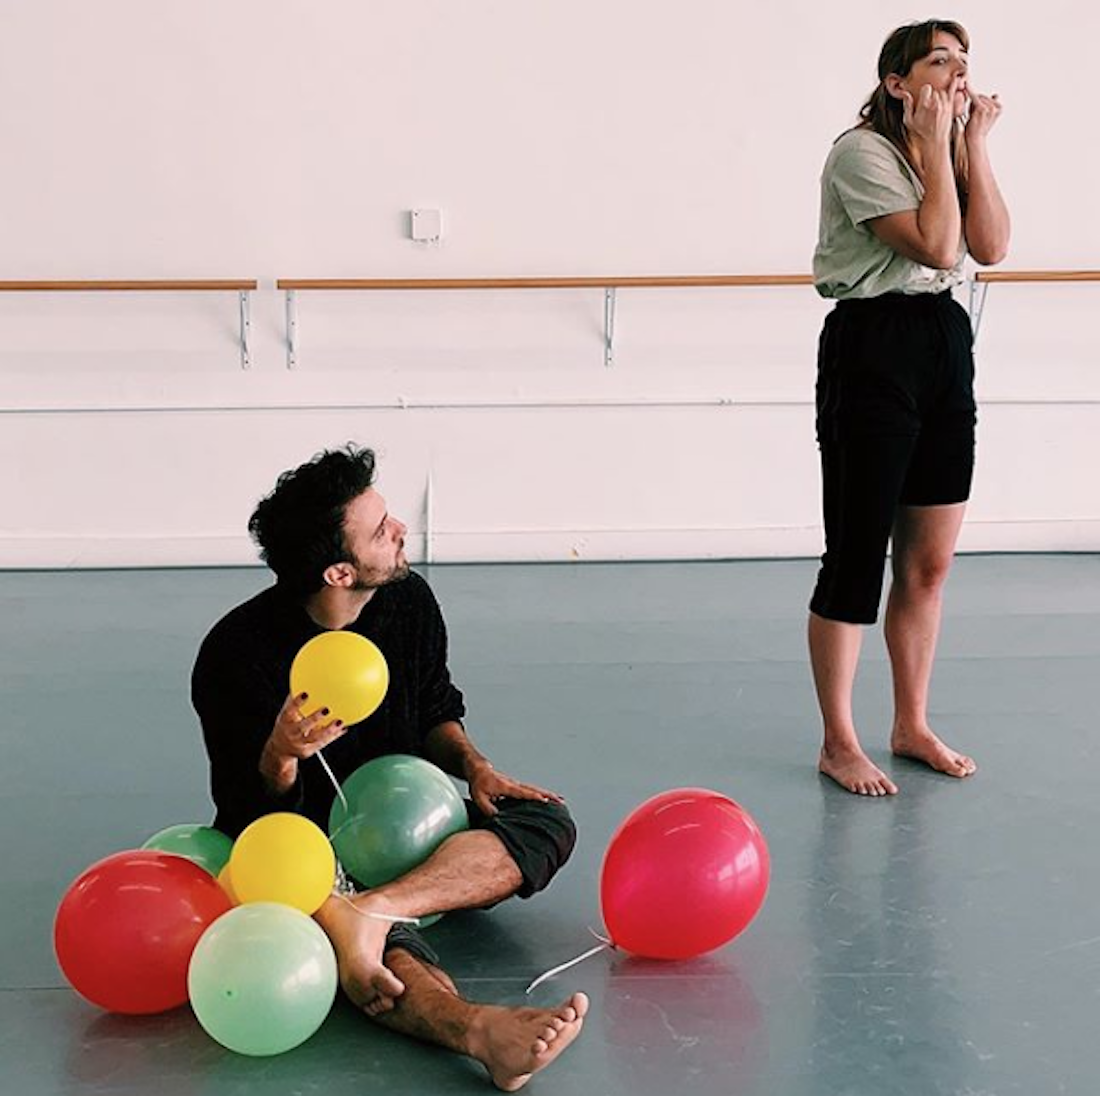 Dancers Filippo Pelacchi and Kelly Hurlburt of FluxFlow Dance Project play with balloons during a rehearsal of FluxFlow's Ursula